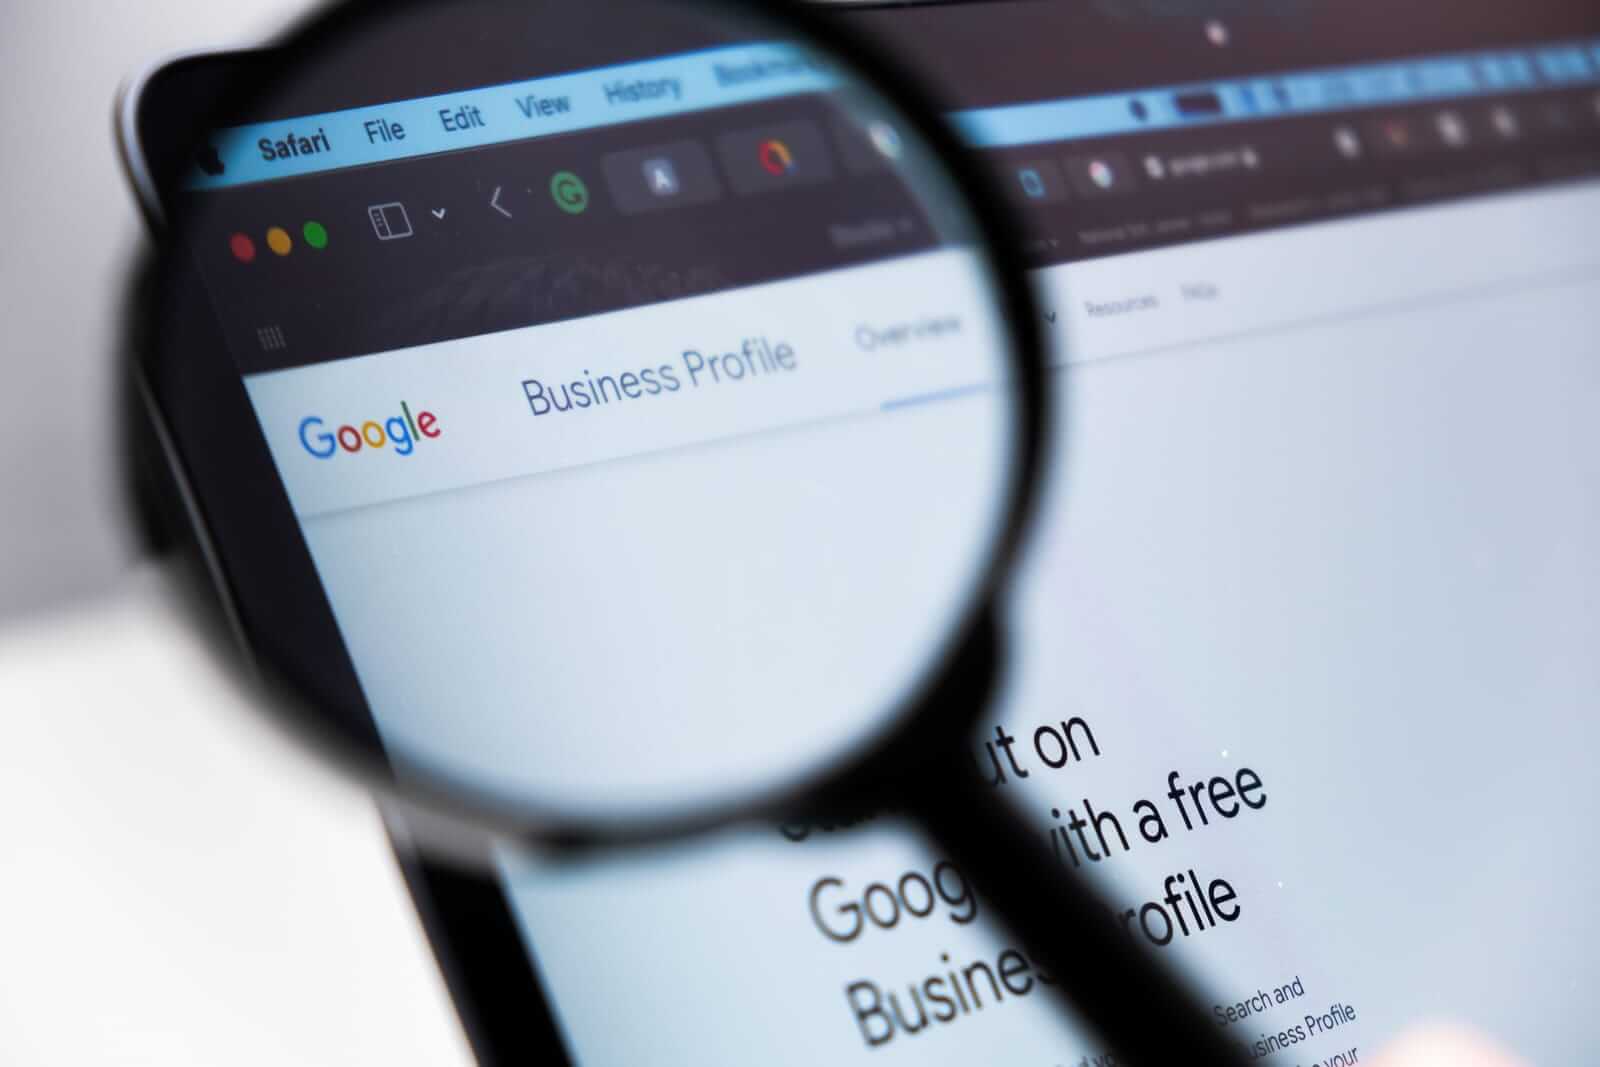 google-business-profile-logo-enlarged-through-a-magnifying-glass-on-a-laptop-screen